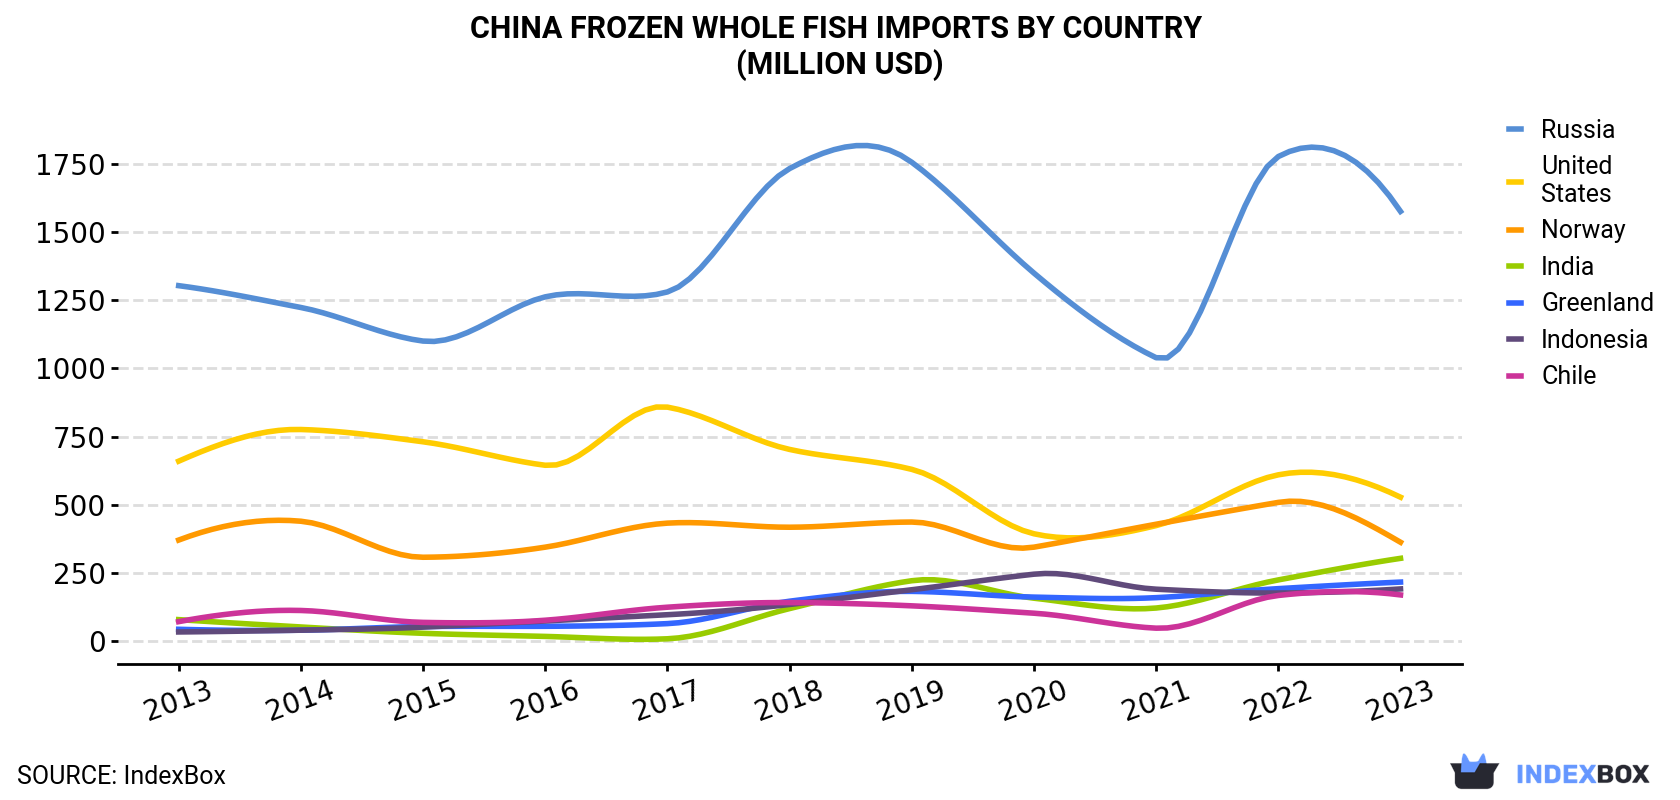 China Frozen Whole Fish Imports By Country (Million USD)